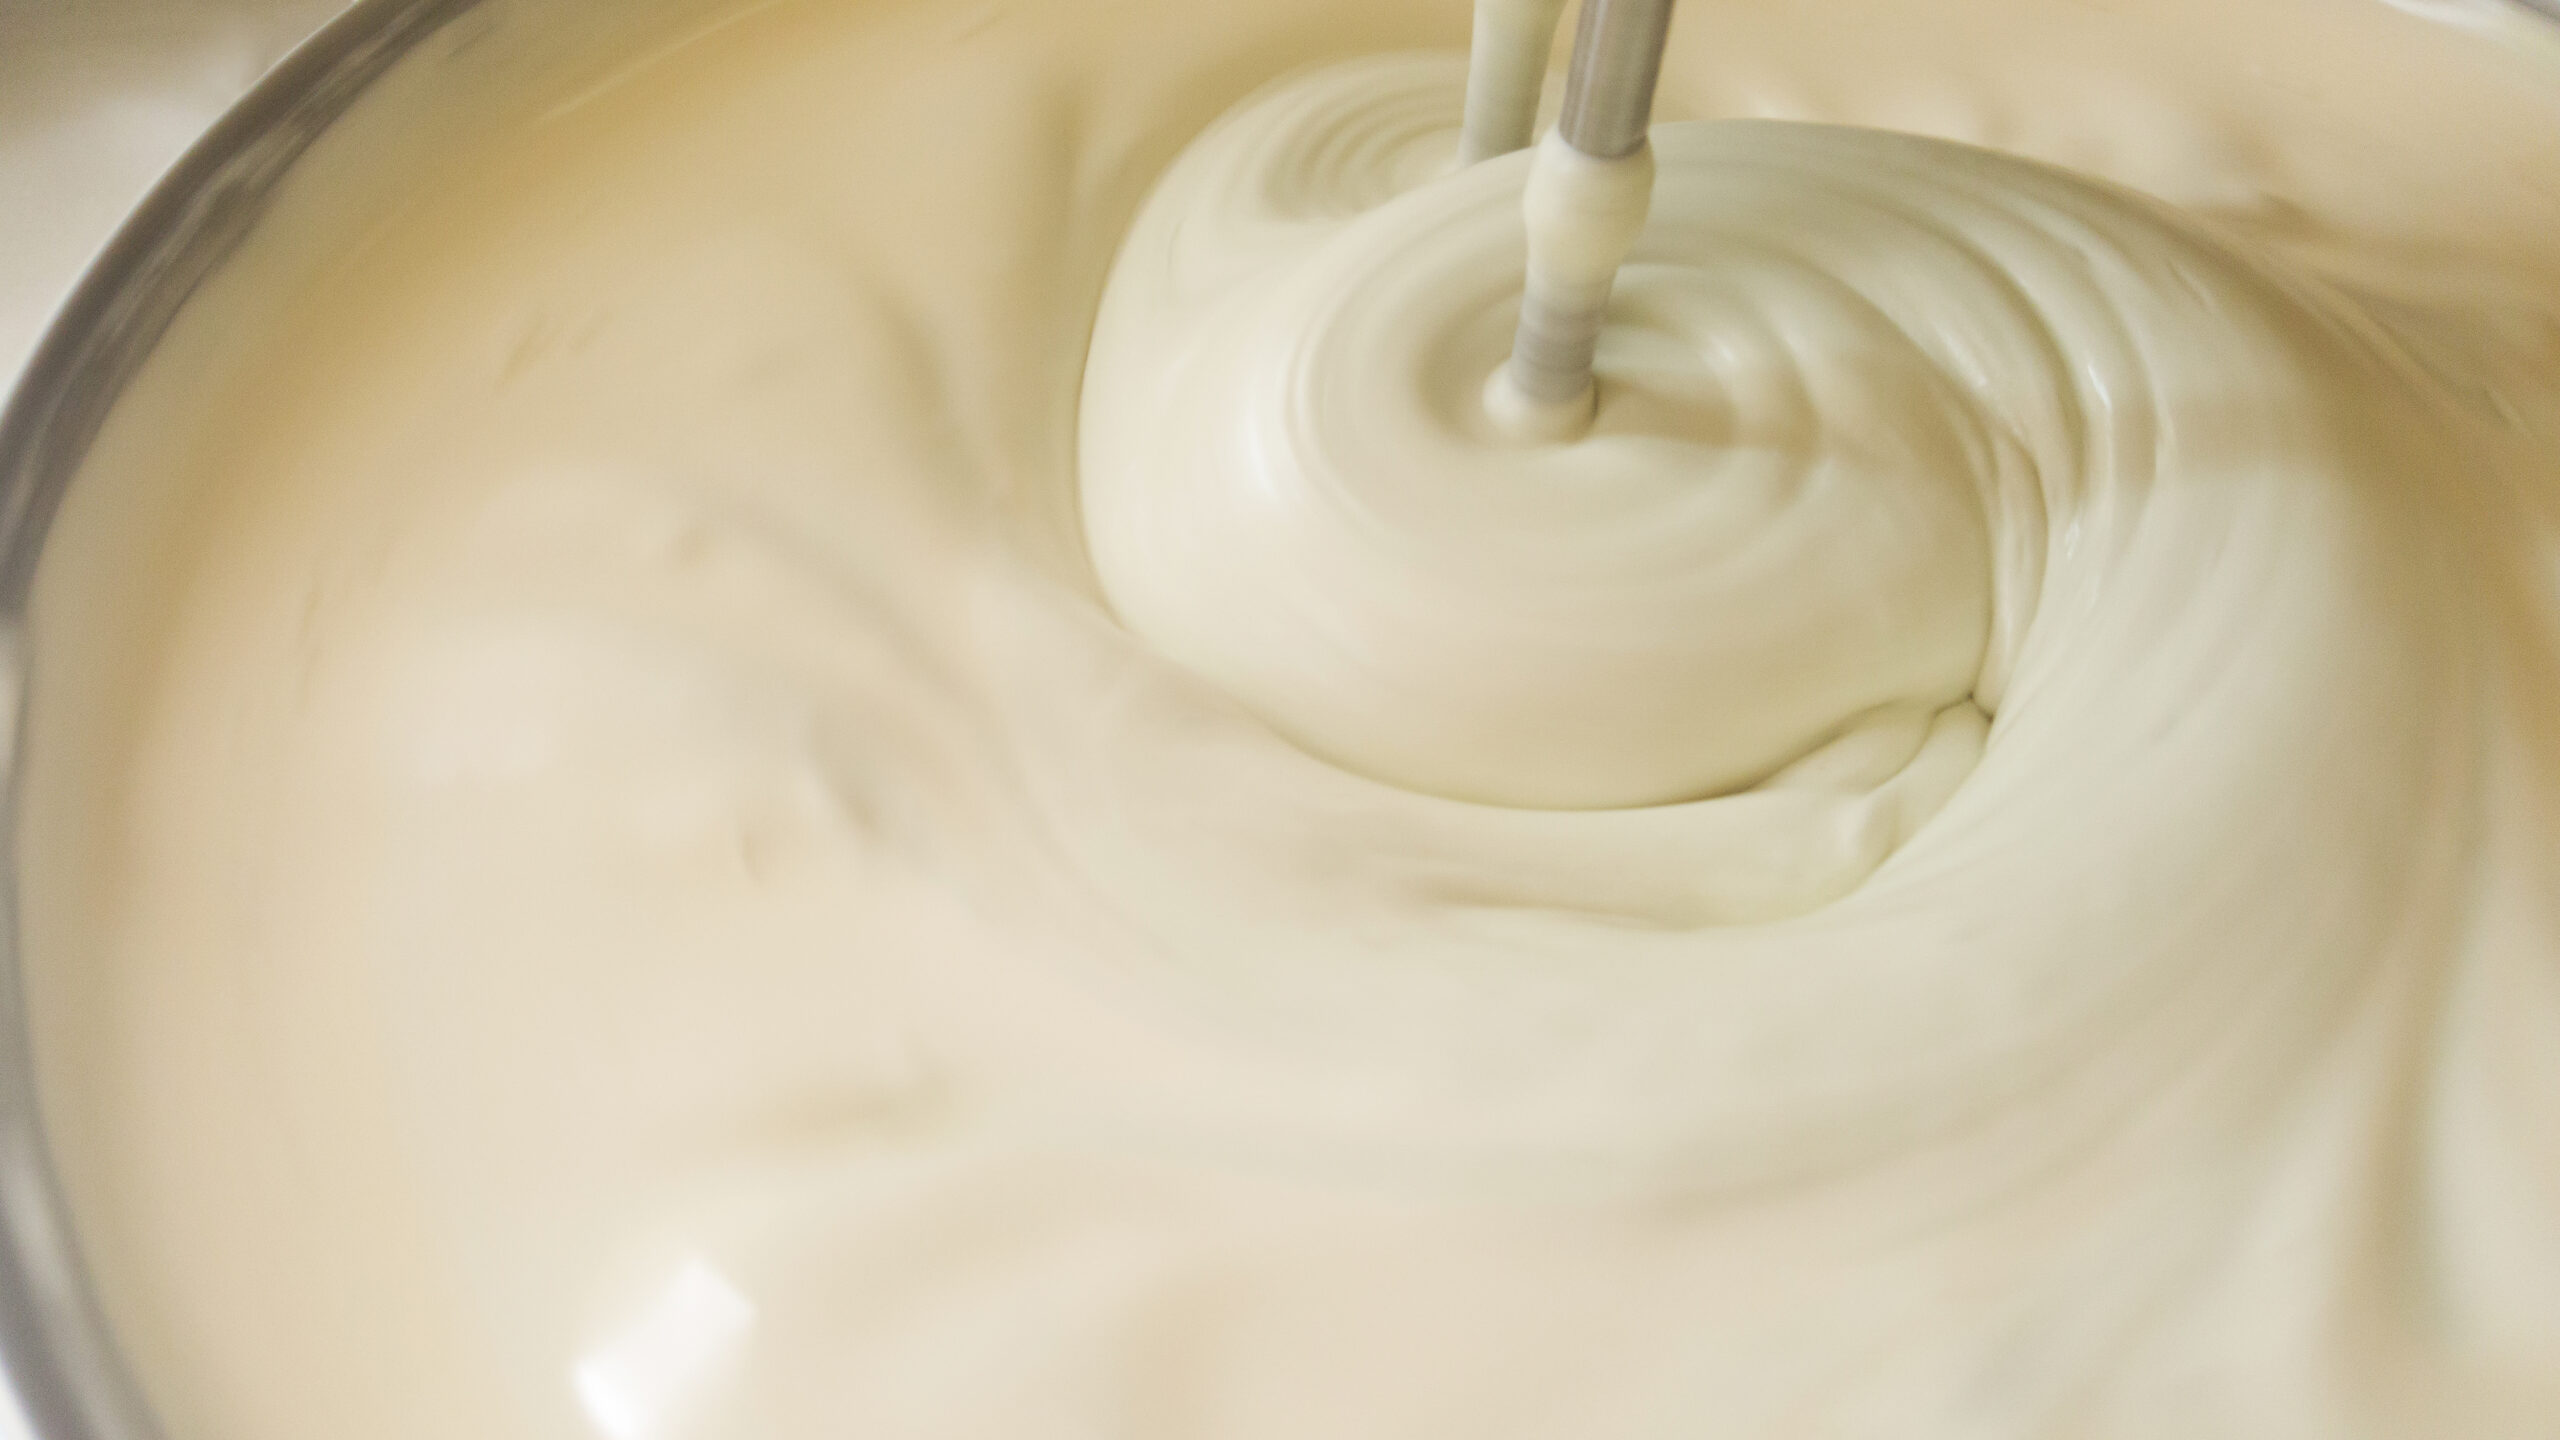 mixing batter in a bowl image